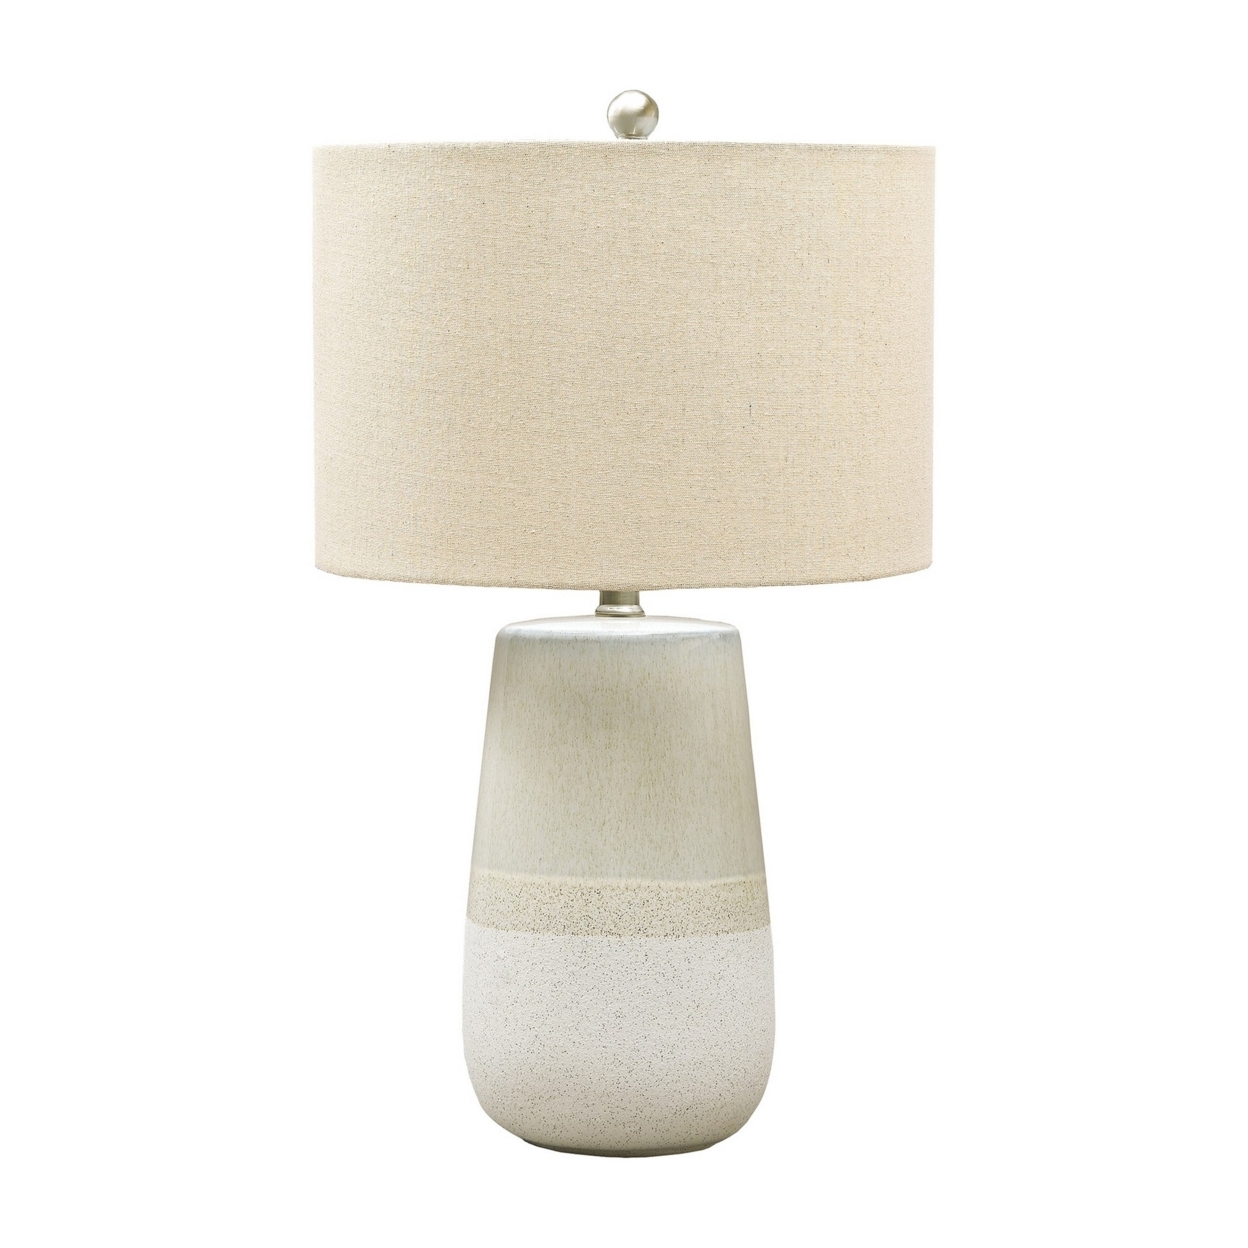 Speckled Ceramic Base Table Lamp With Drum Shade, Beige- Saltoro Sherpi